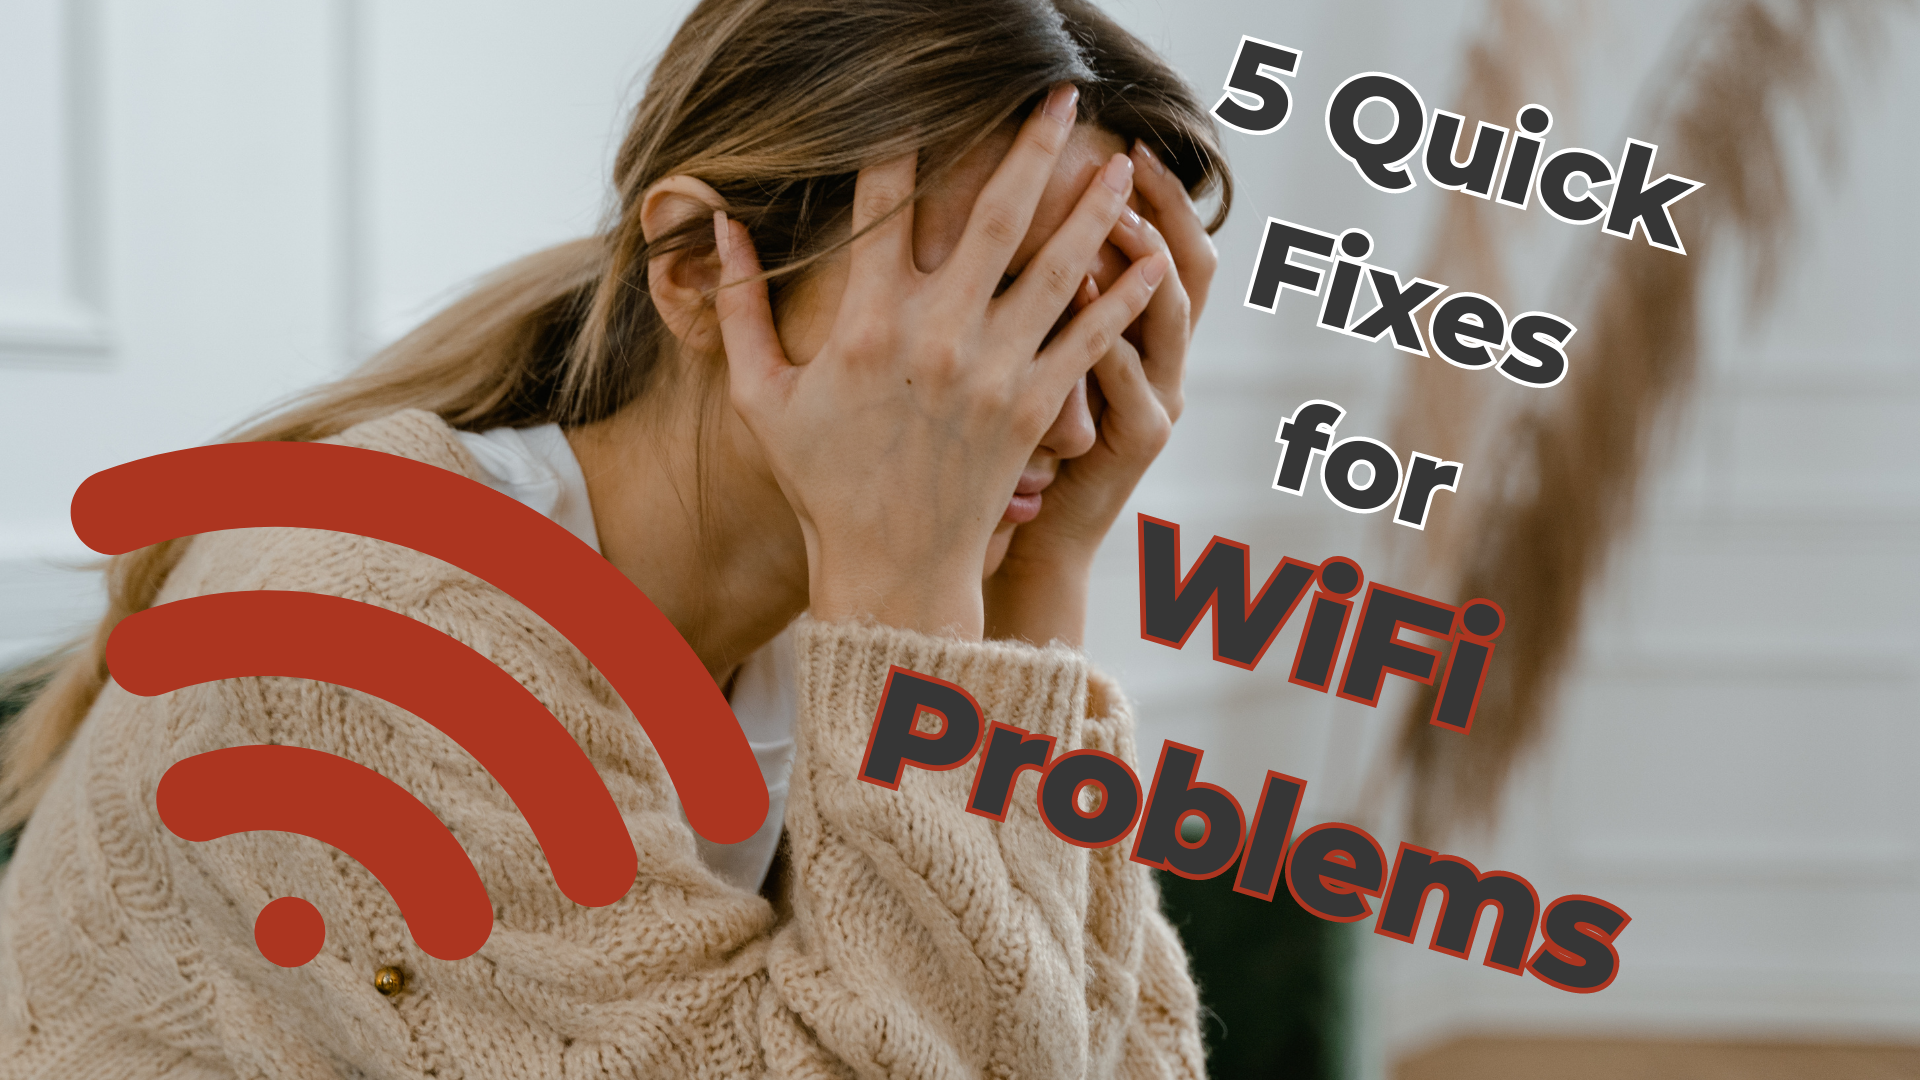 5 Quick Fixes for WiFi Problems